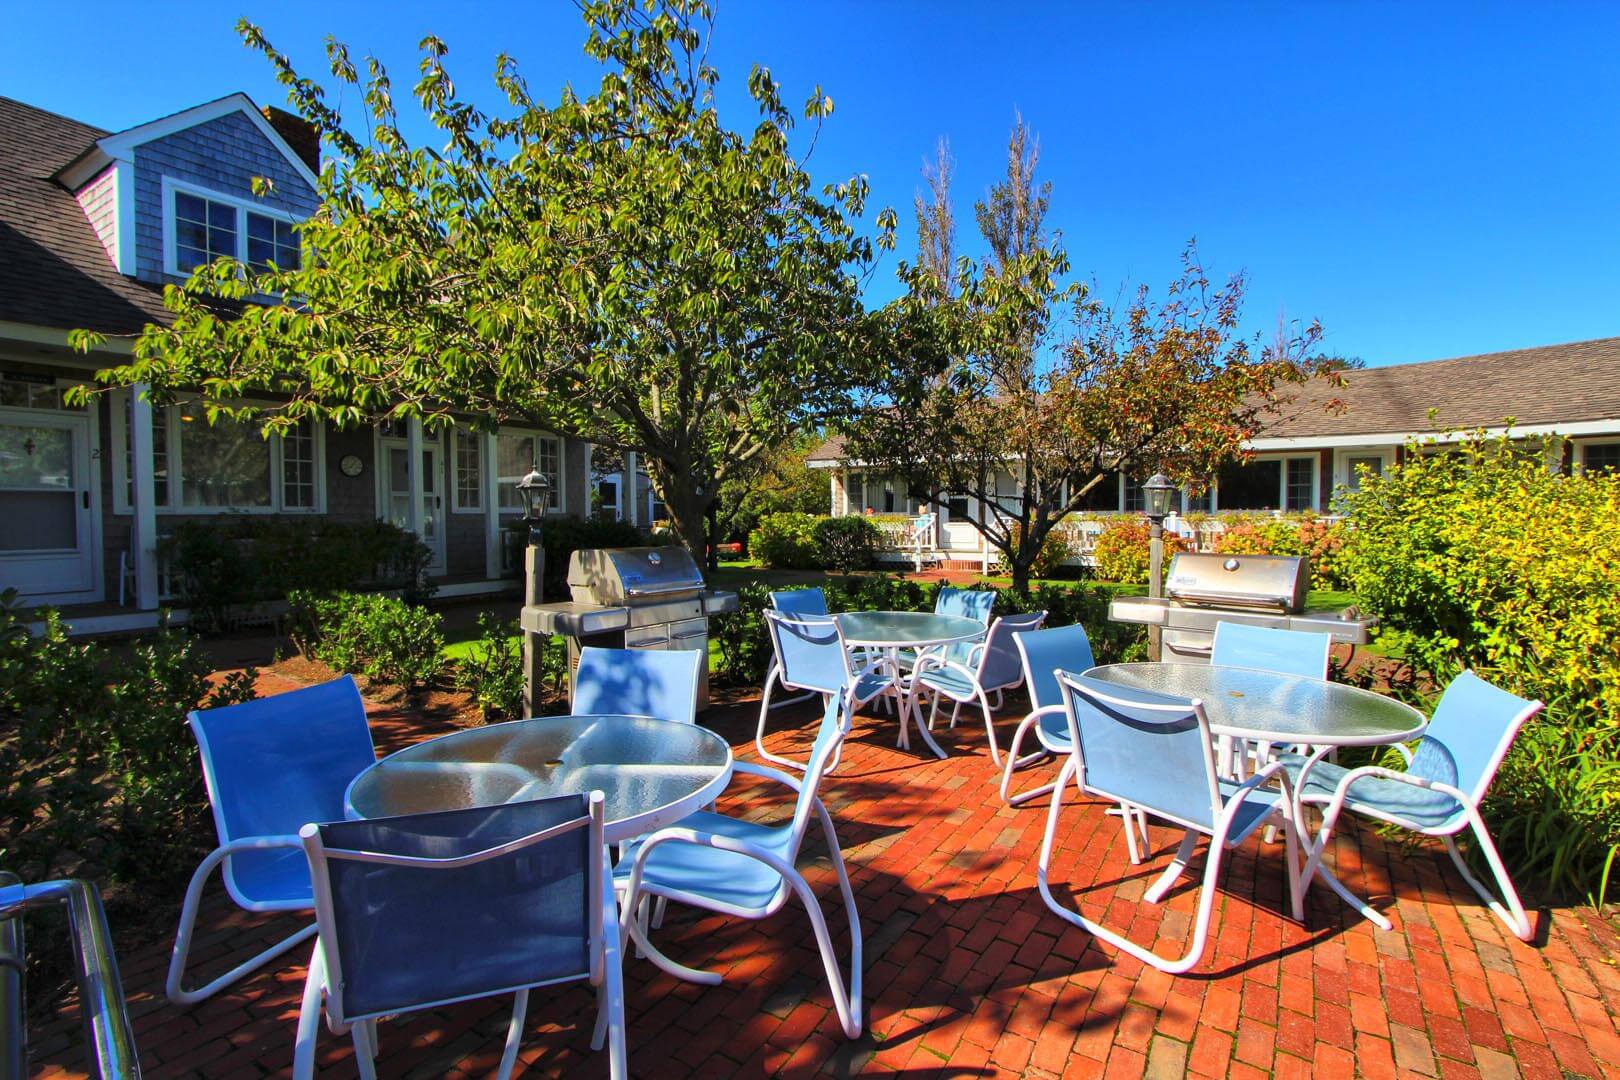 A welcoming BBQ area at VRI's Brant Point Courtyard in Massachusetts.